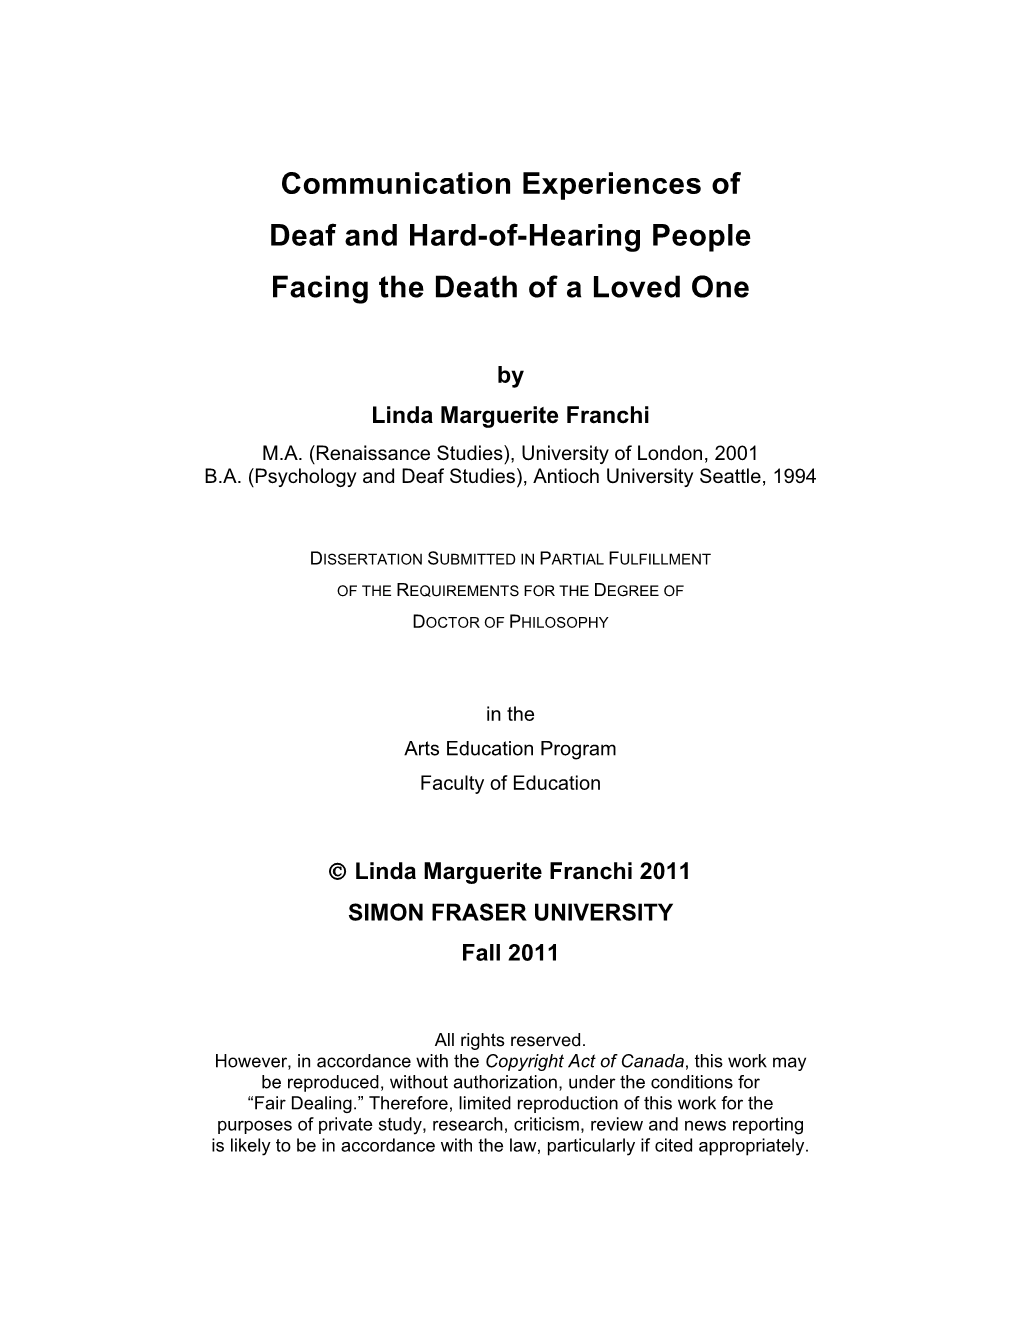 Communication Experiences of Deaf and Hard-Of-Hearing People Facing the Death of a Loved One